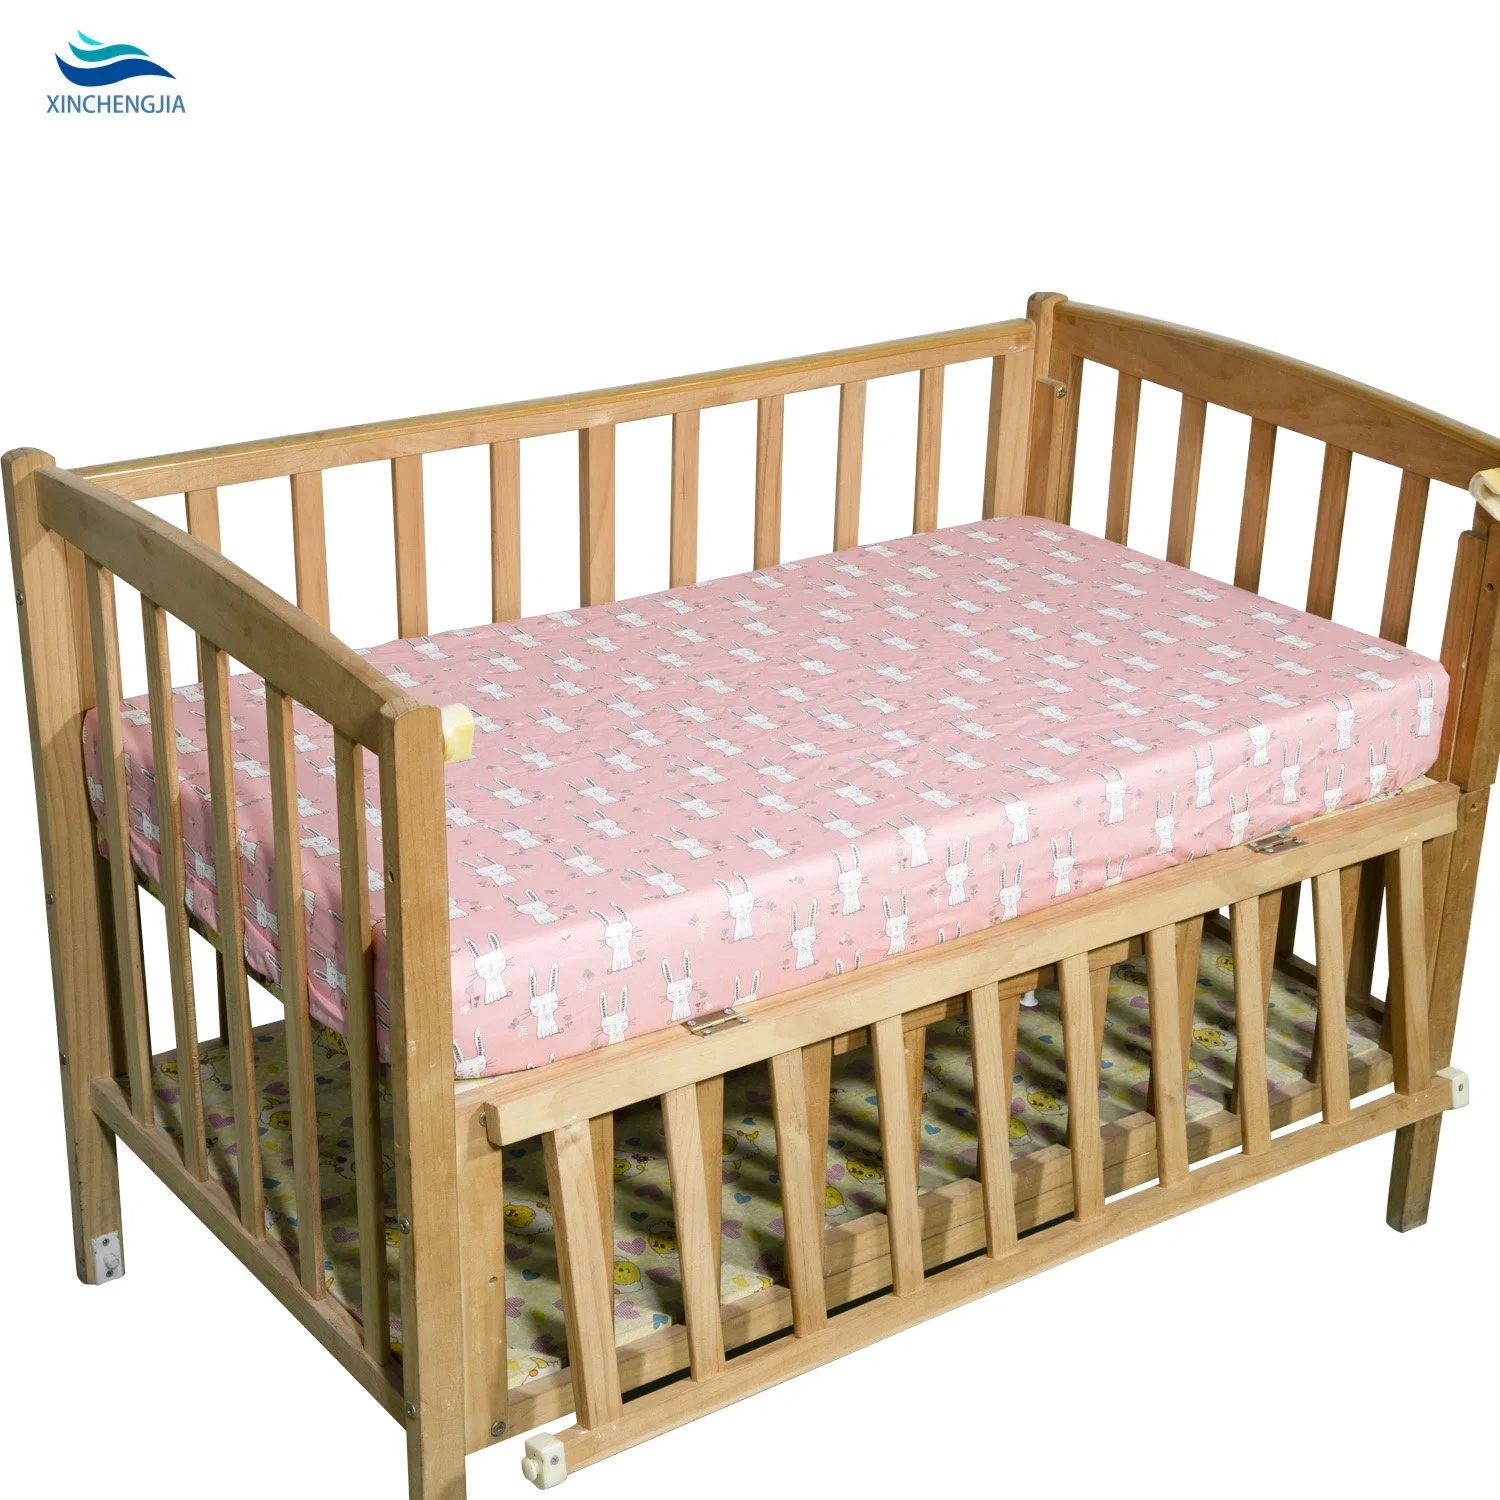 Exclusive for Cross-Border Children's Waterproof Bedspread Brushed Cloth Quilted Mattress Protector Crib Fitted Sheet